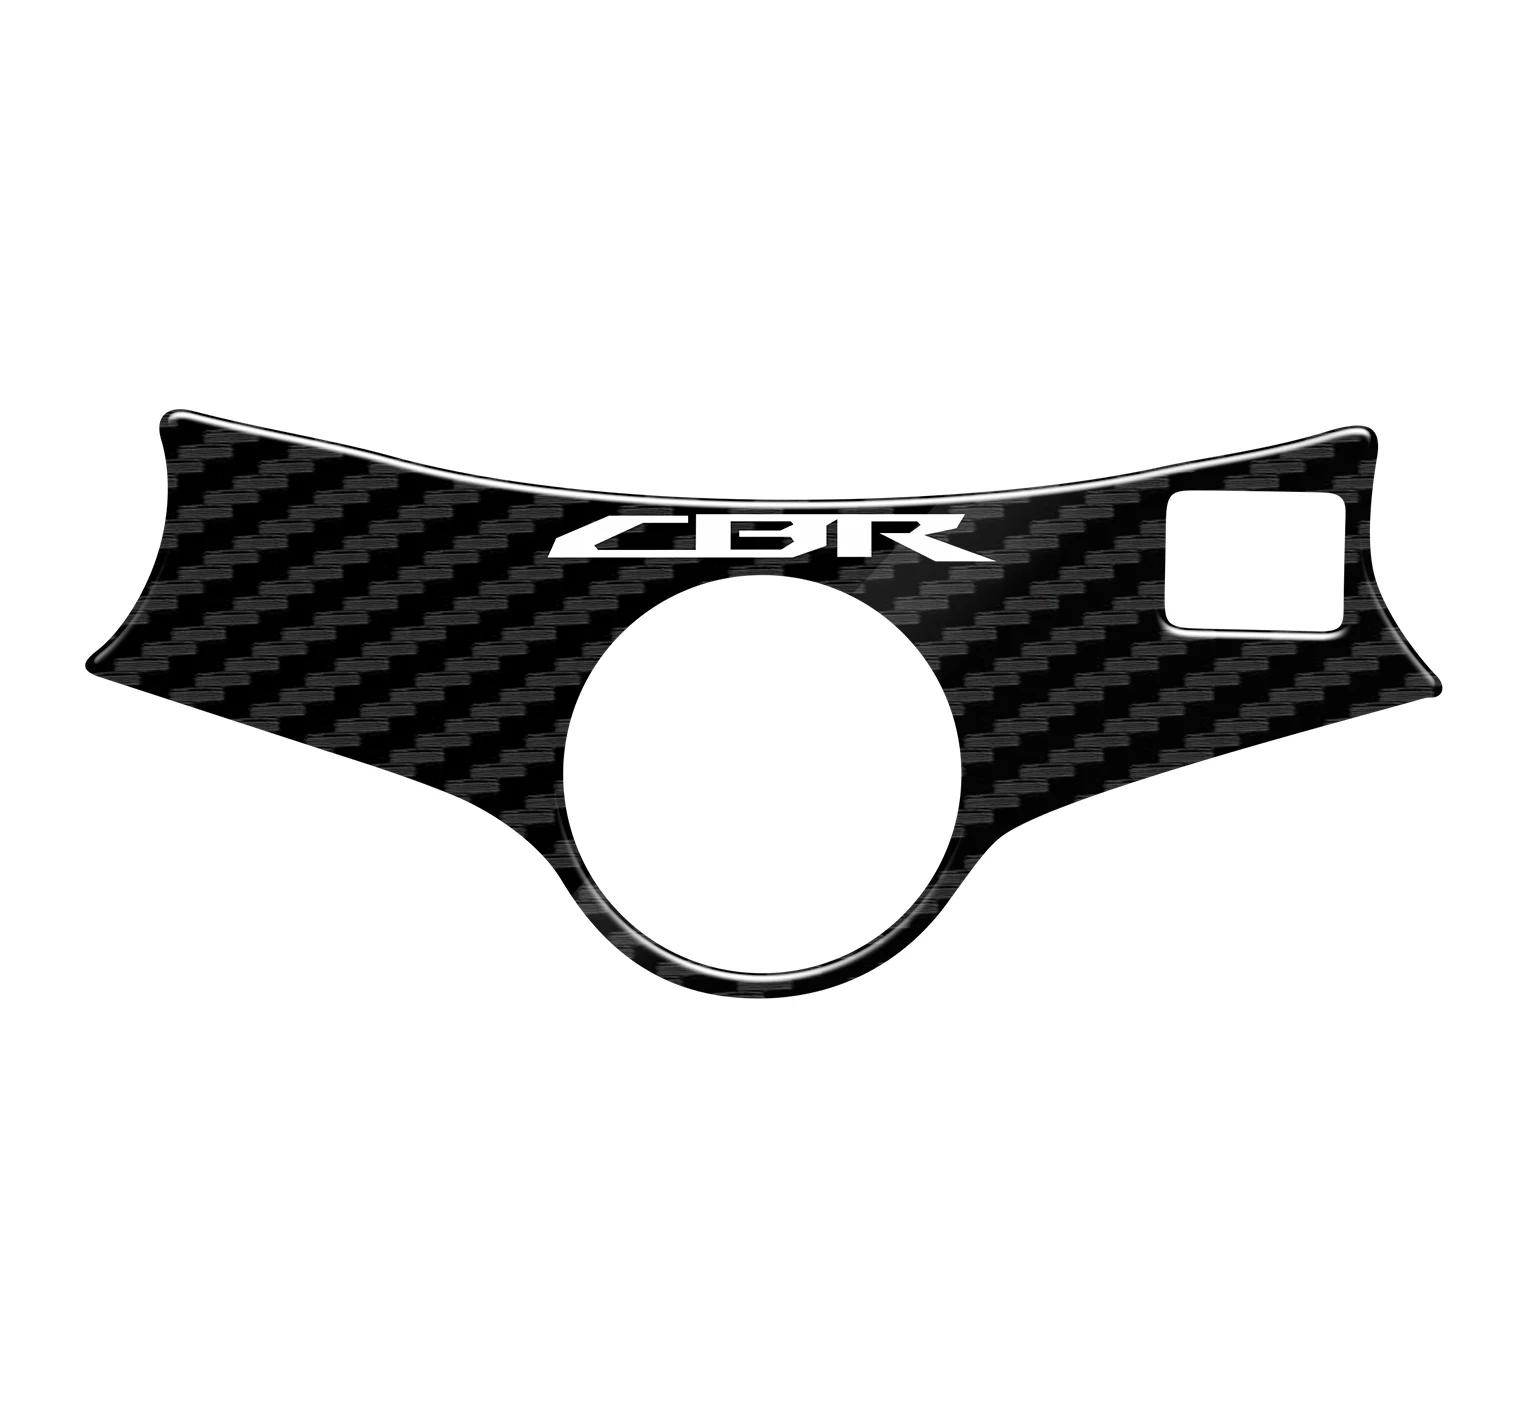 3D Motorcycle Carbon Fiber Pattern Top Triple Clamp Yoke Sticker Case for HONDA CBR600 F4 F4I 1999-2007 2002 2001 2003 2004 2005 replacement car key case for saab 93 95 9 3 9 5 2003 2007 4 buttons smart remote key shell